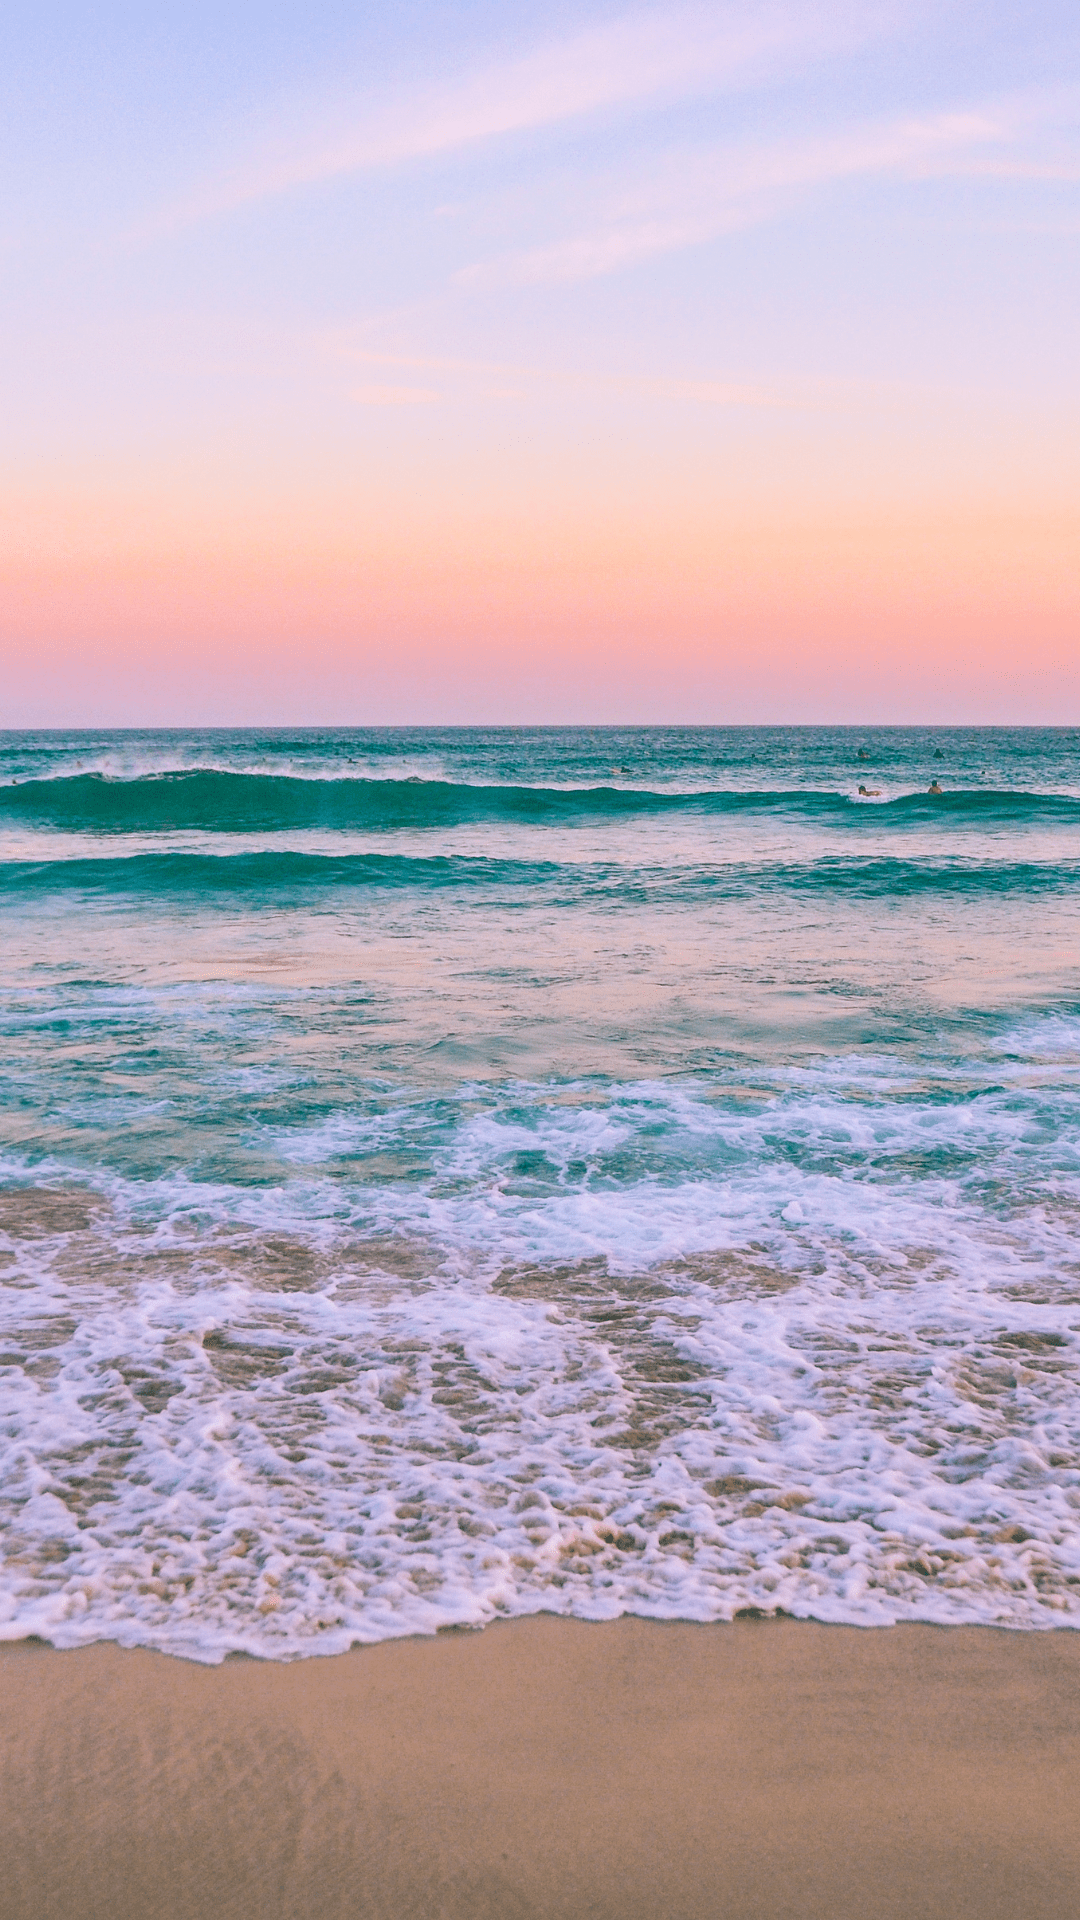 A picture of the ocean with a pink and blue sunset. - Summer, beach